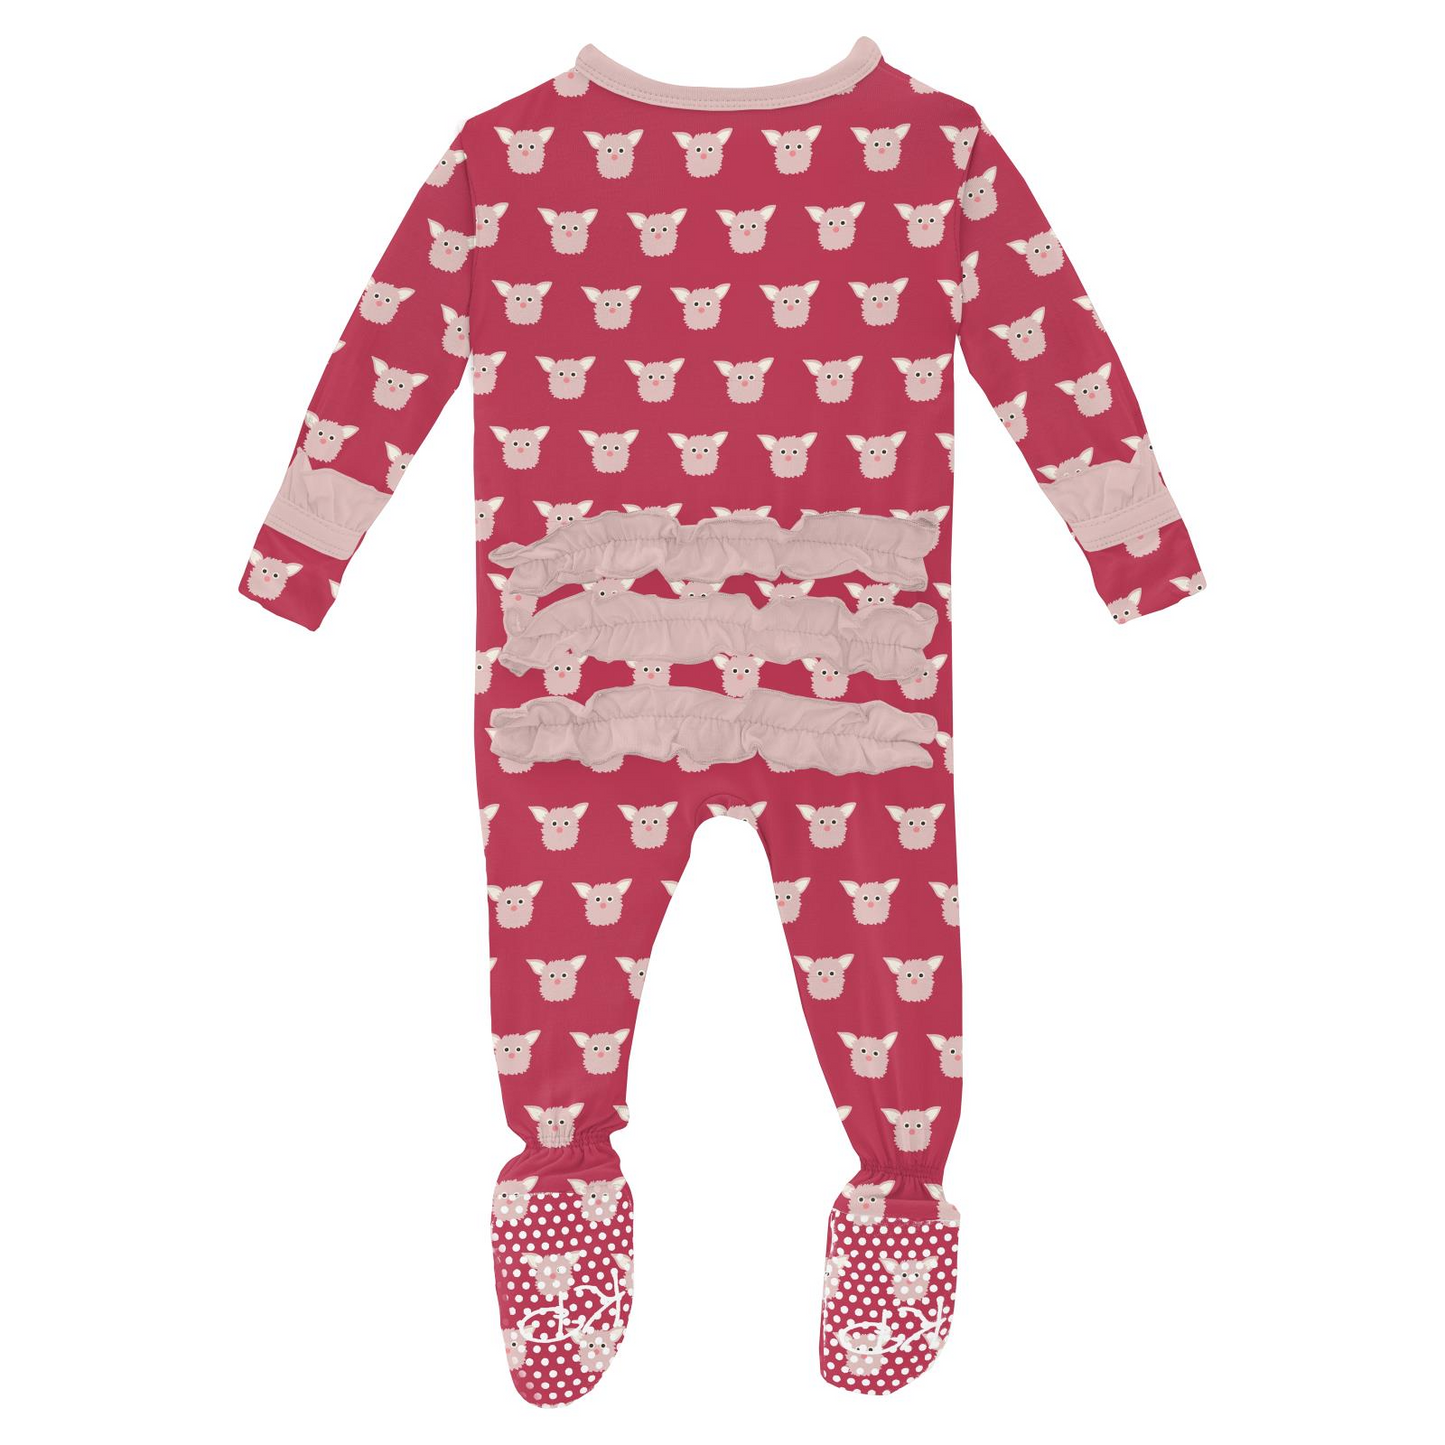 Kickee Pants Print Classic Ruffle Footie with Snaps: Cherry Pie Furry Friends